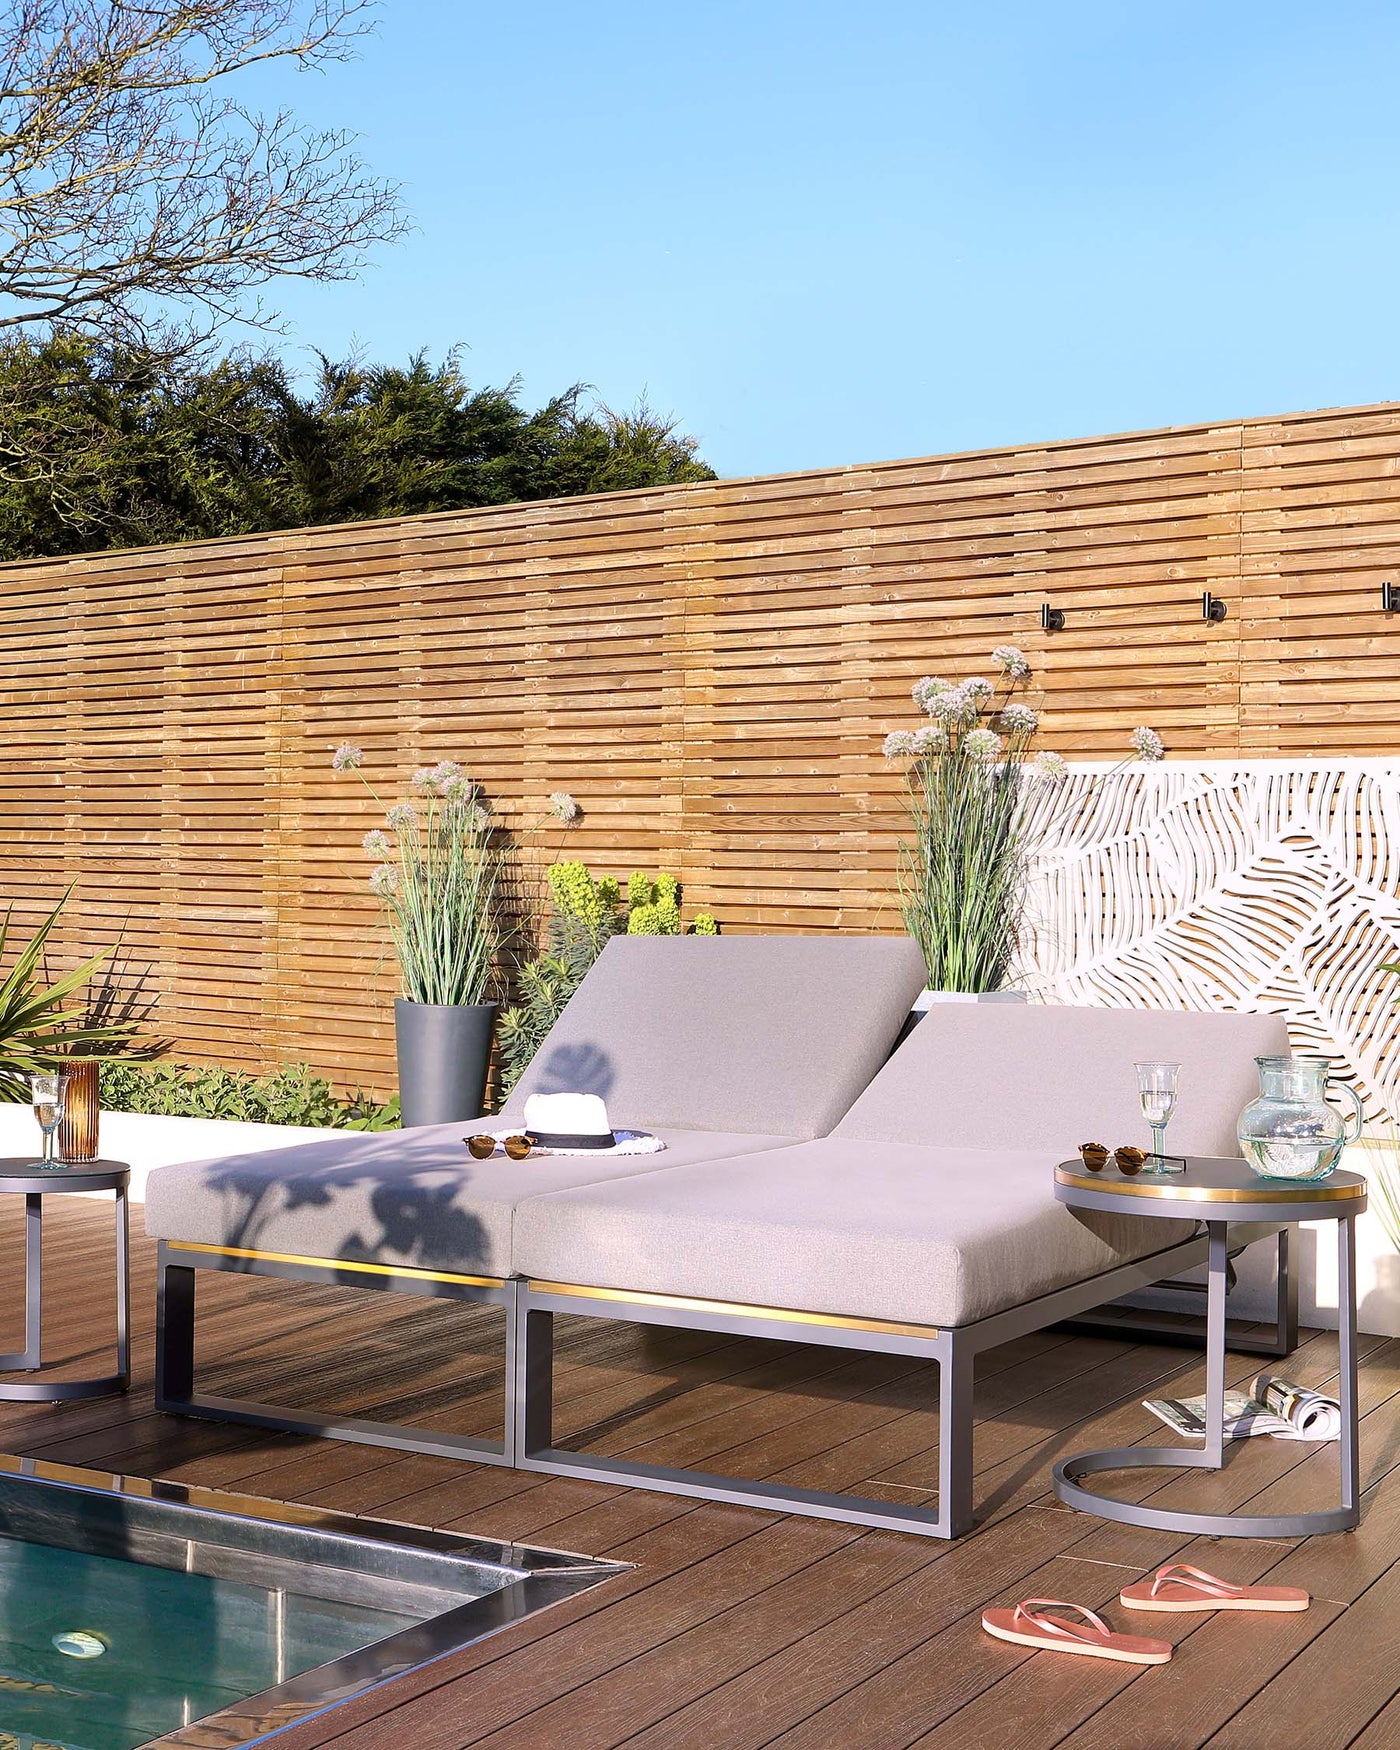 Modern outdoor furniture set featuring a sleek double lounger with light grey cushions and metal frame, complemented by a pair of cylindrical side tables with metal bases and wood-finish tops, all arranged on a wooden deck by a poolside.